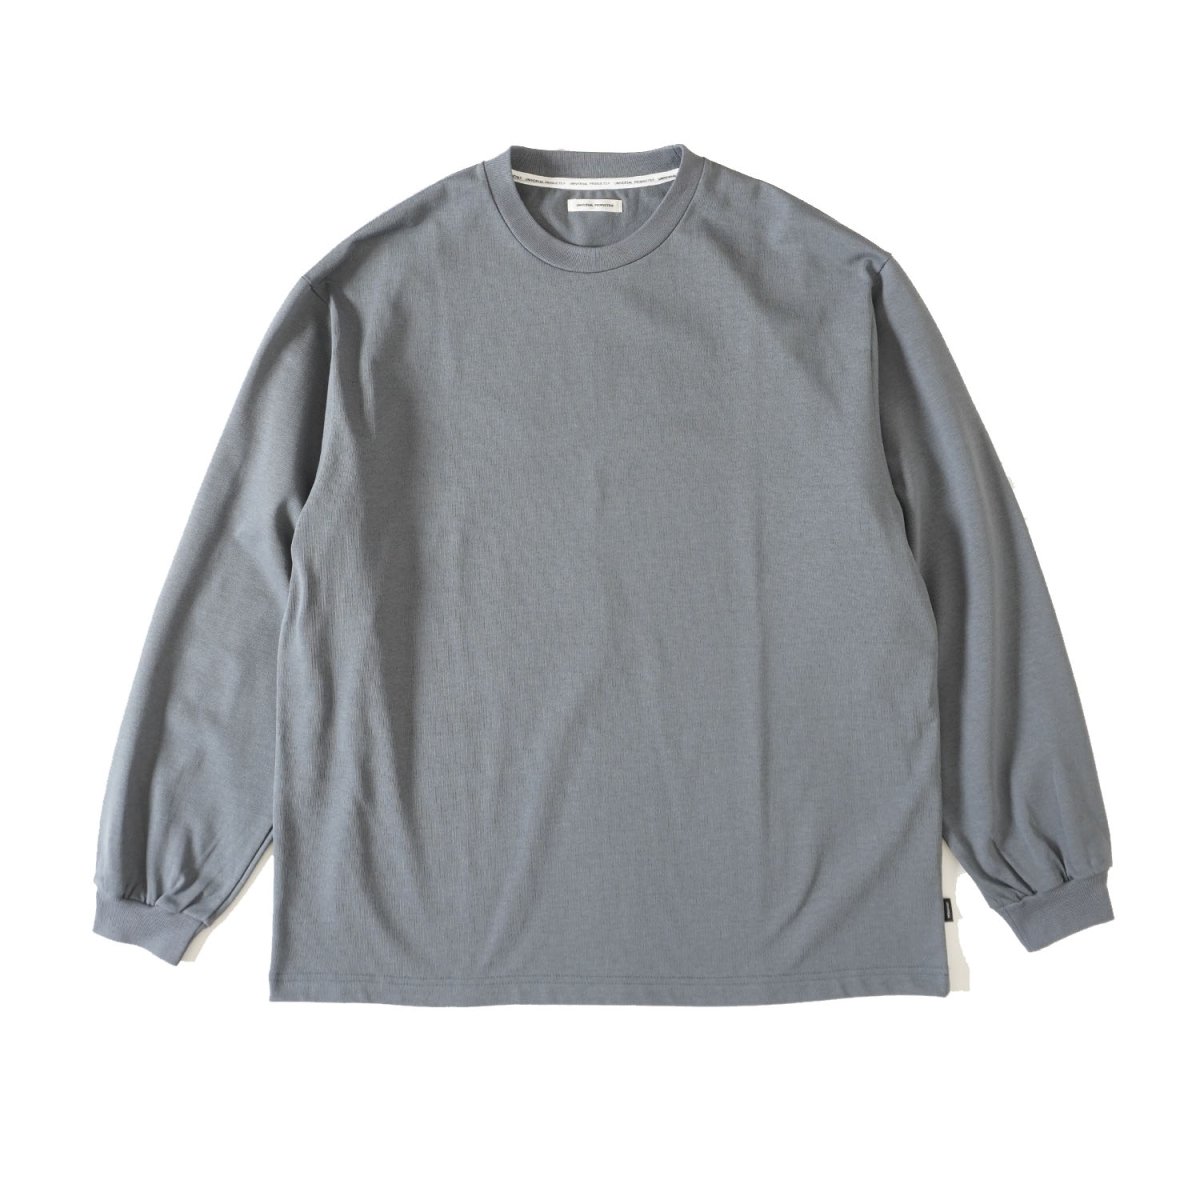 UNIVERSAL<BR>PRODUCTS <BR>L/S T-SHIRT (BLUE GRAY)
